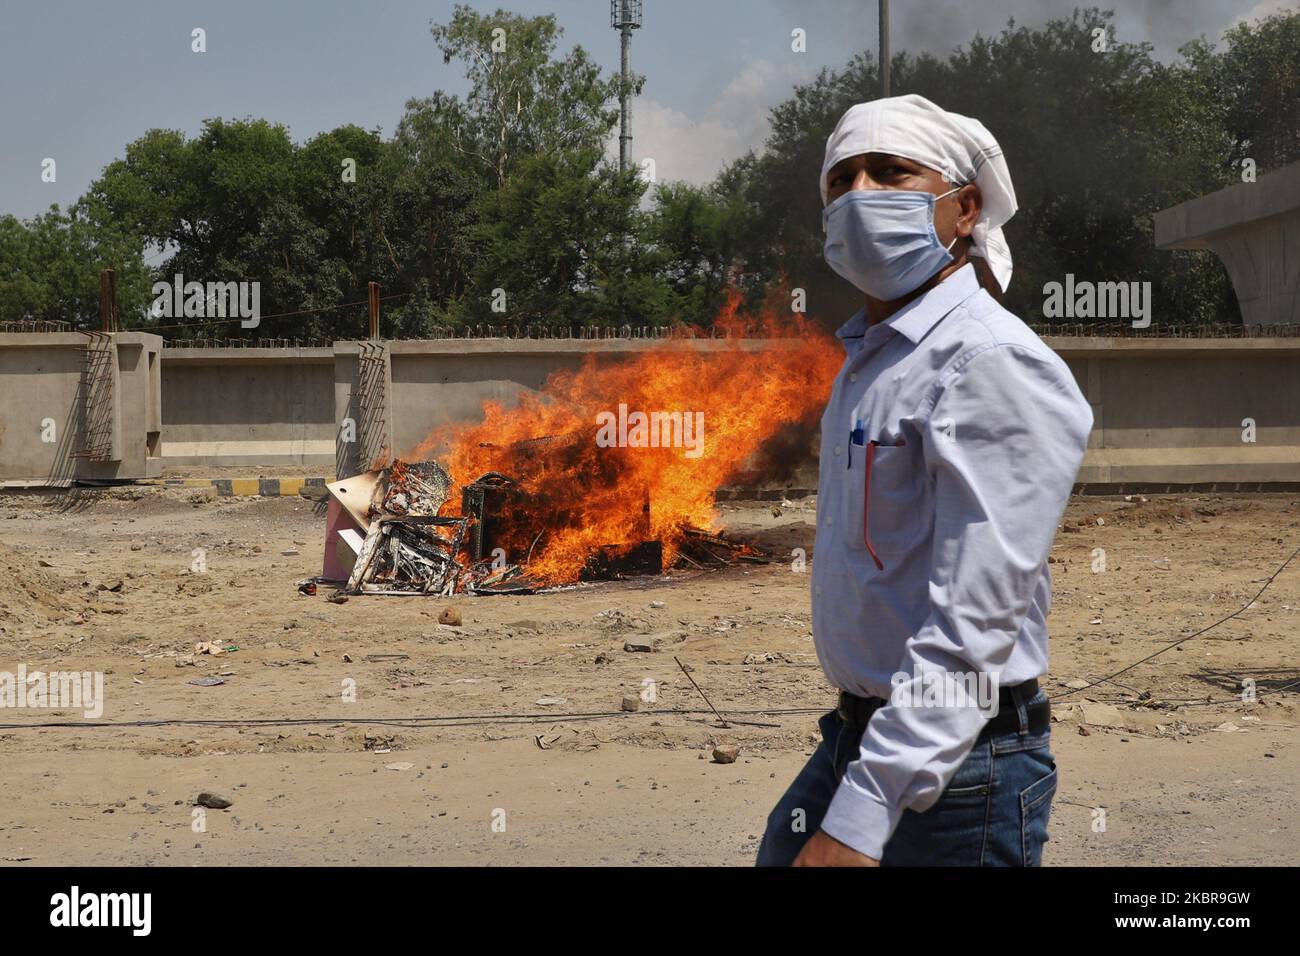 A man wearing a mask walks past the burned chinese products during a protest against Chinese President Xi Jinping in Gurugram on the outskirts of New Delhi, India on 17 June 2020. Seventeen Indian Army soldiers have succumbed to their injuries suffered during the India-China face-off at Galwan Valley in Eastern Ladakh, taking the casualty figure on the Indian side to 20. (Photo by Nasir Kachroo/NurPhoto) Stock Photo